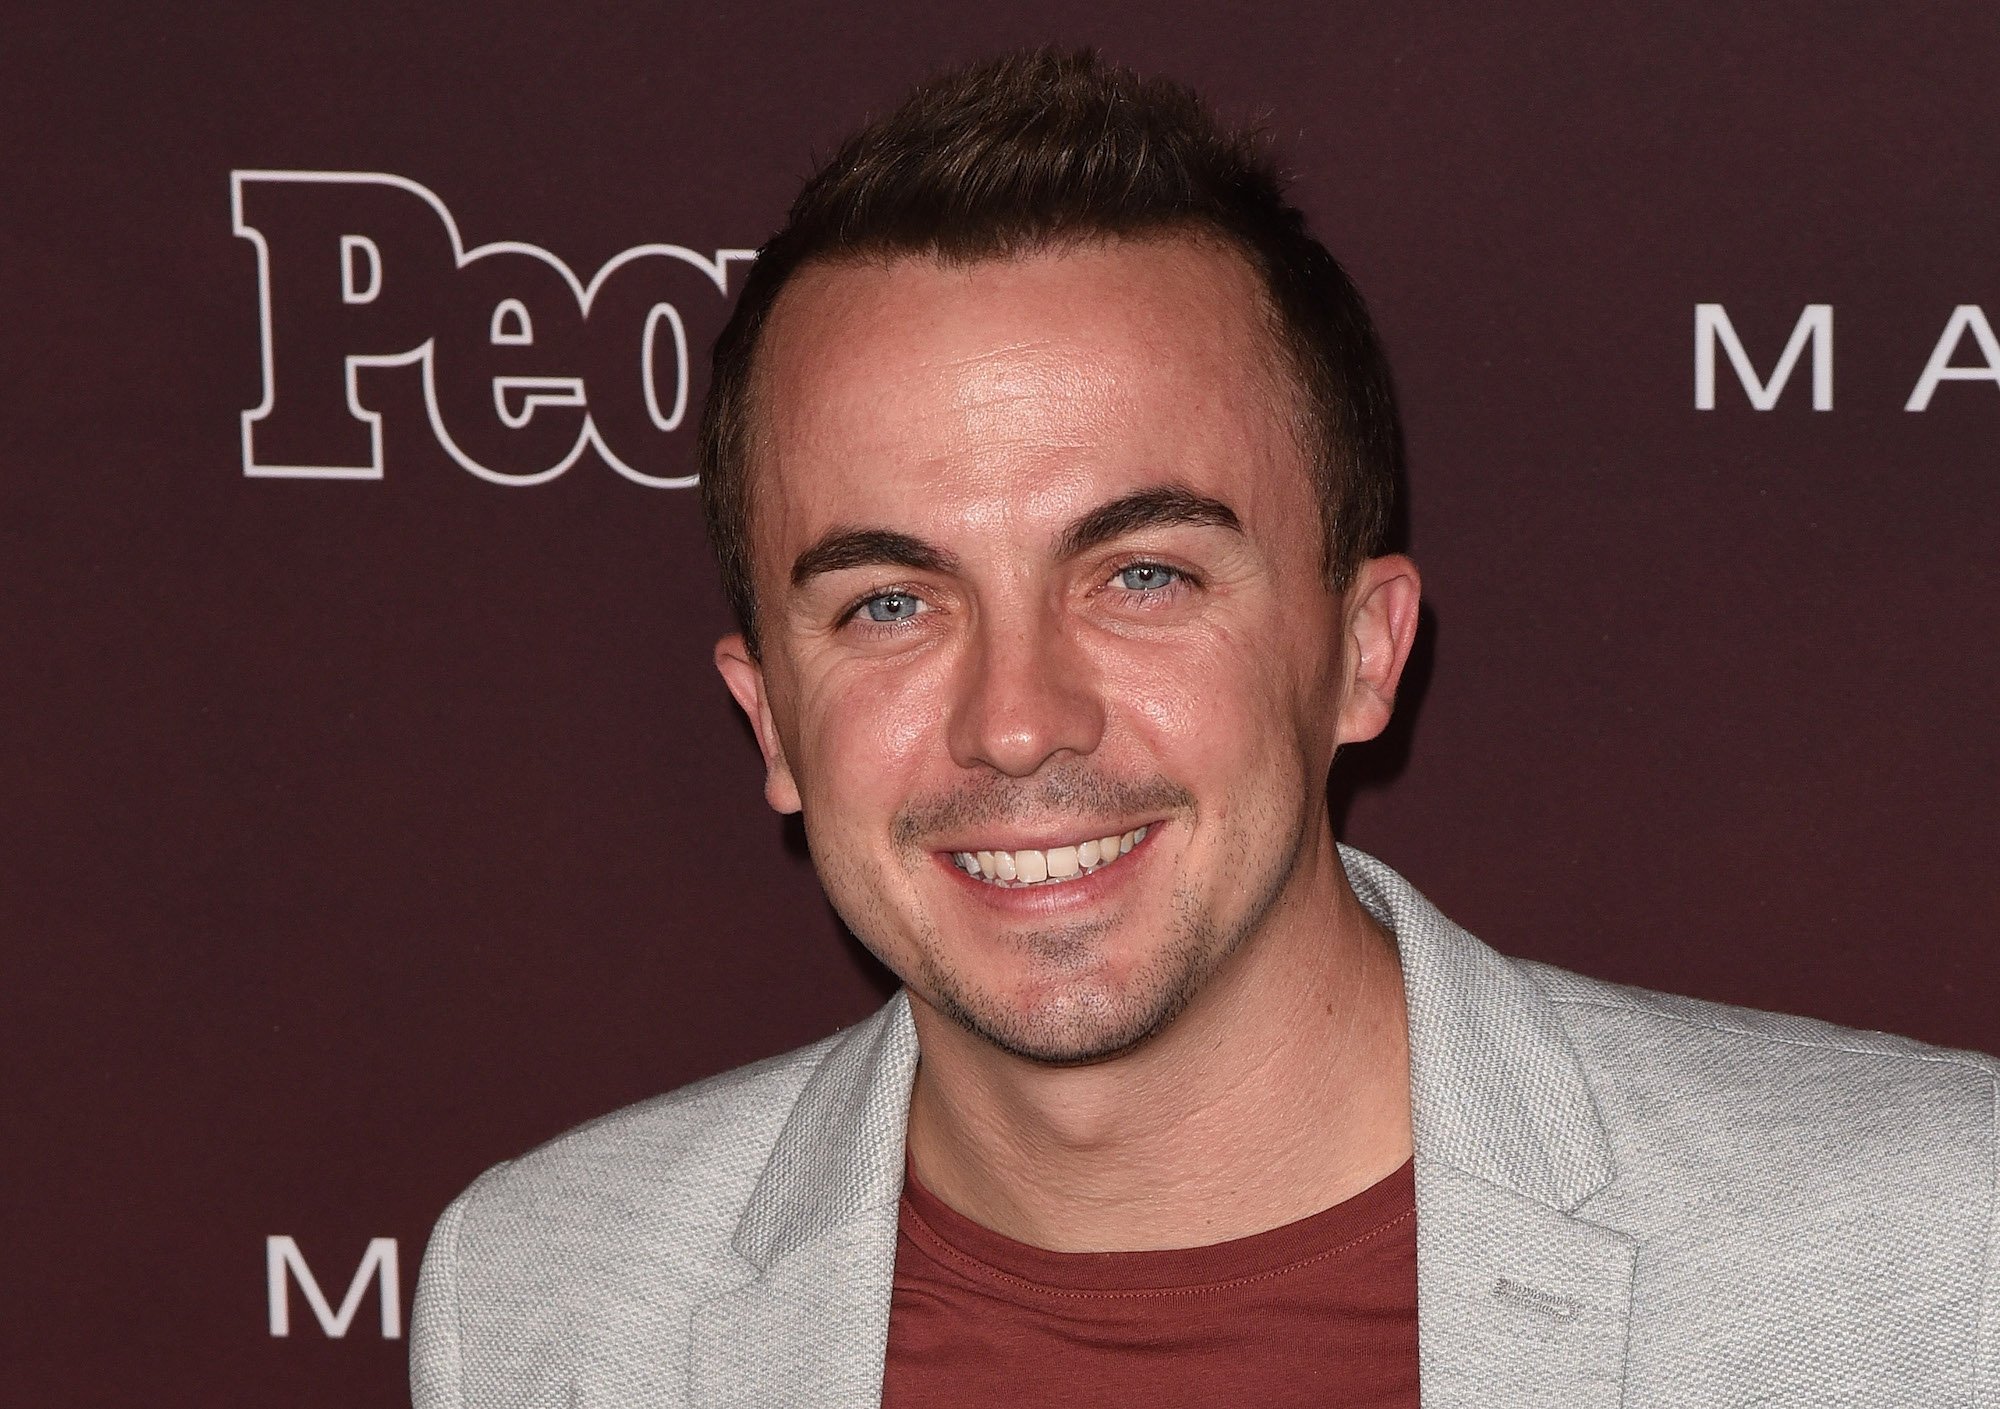 'Malcolm in the Middle' star Frankie Muniz smiles on the red carpet in 2017